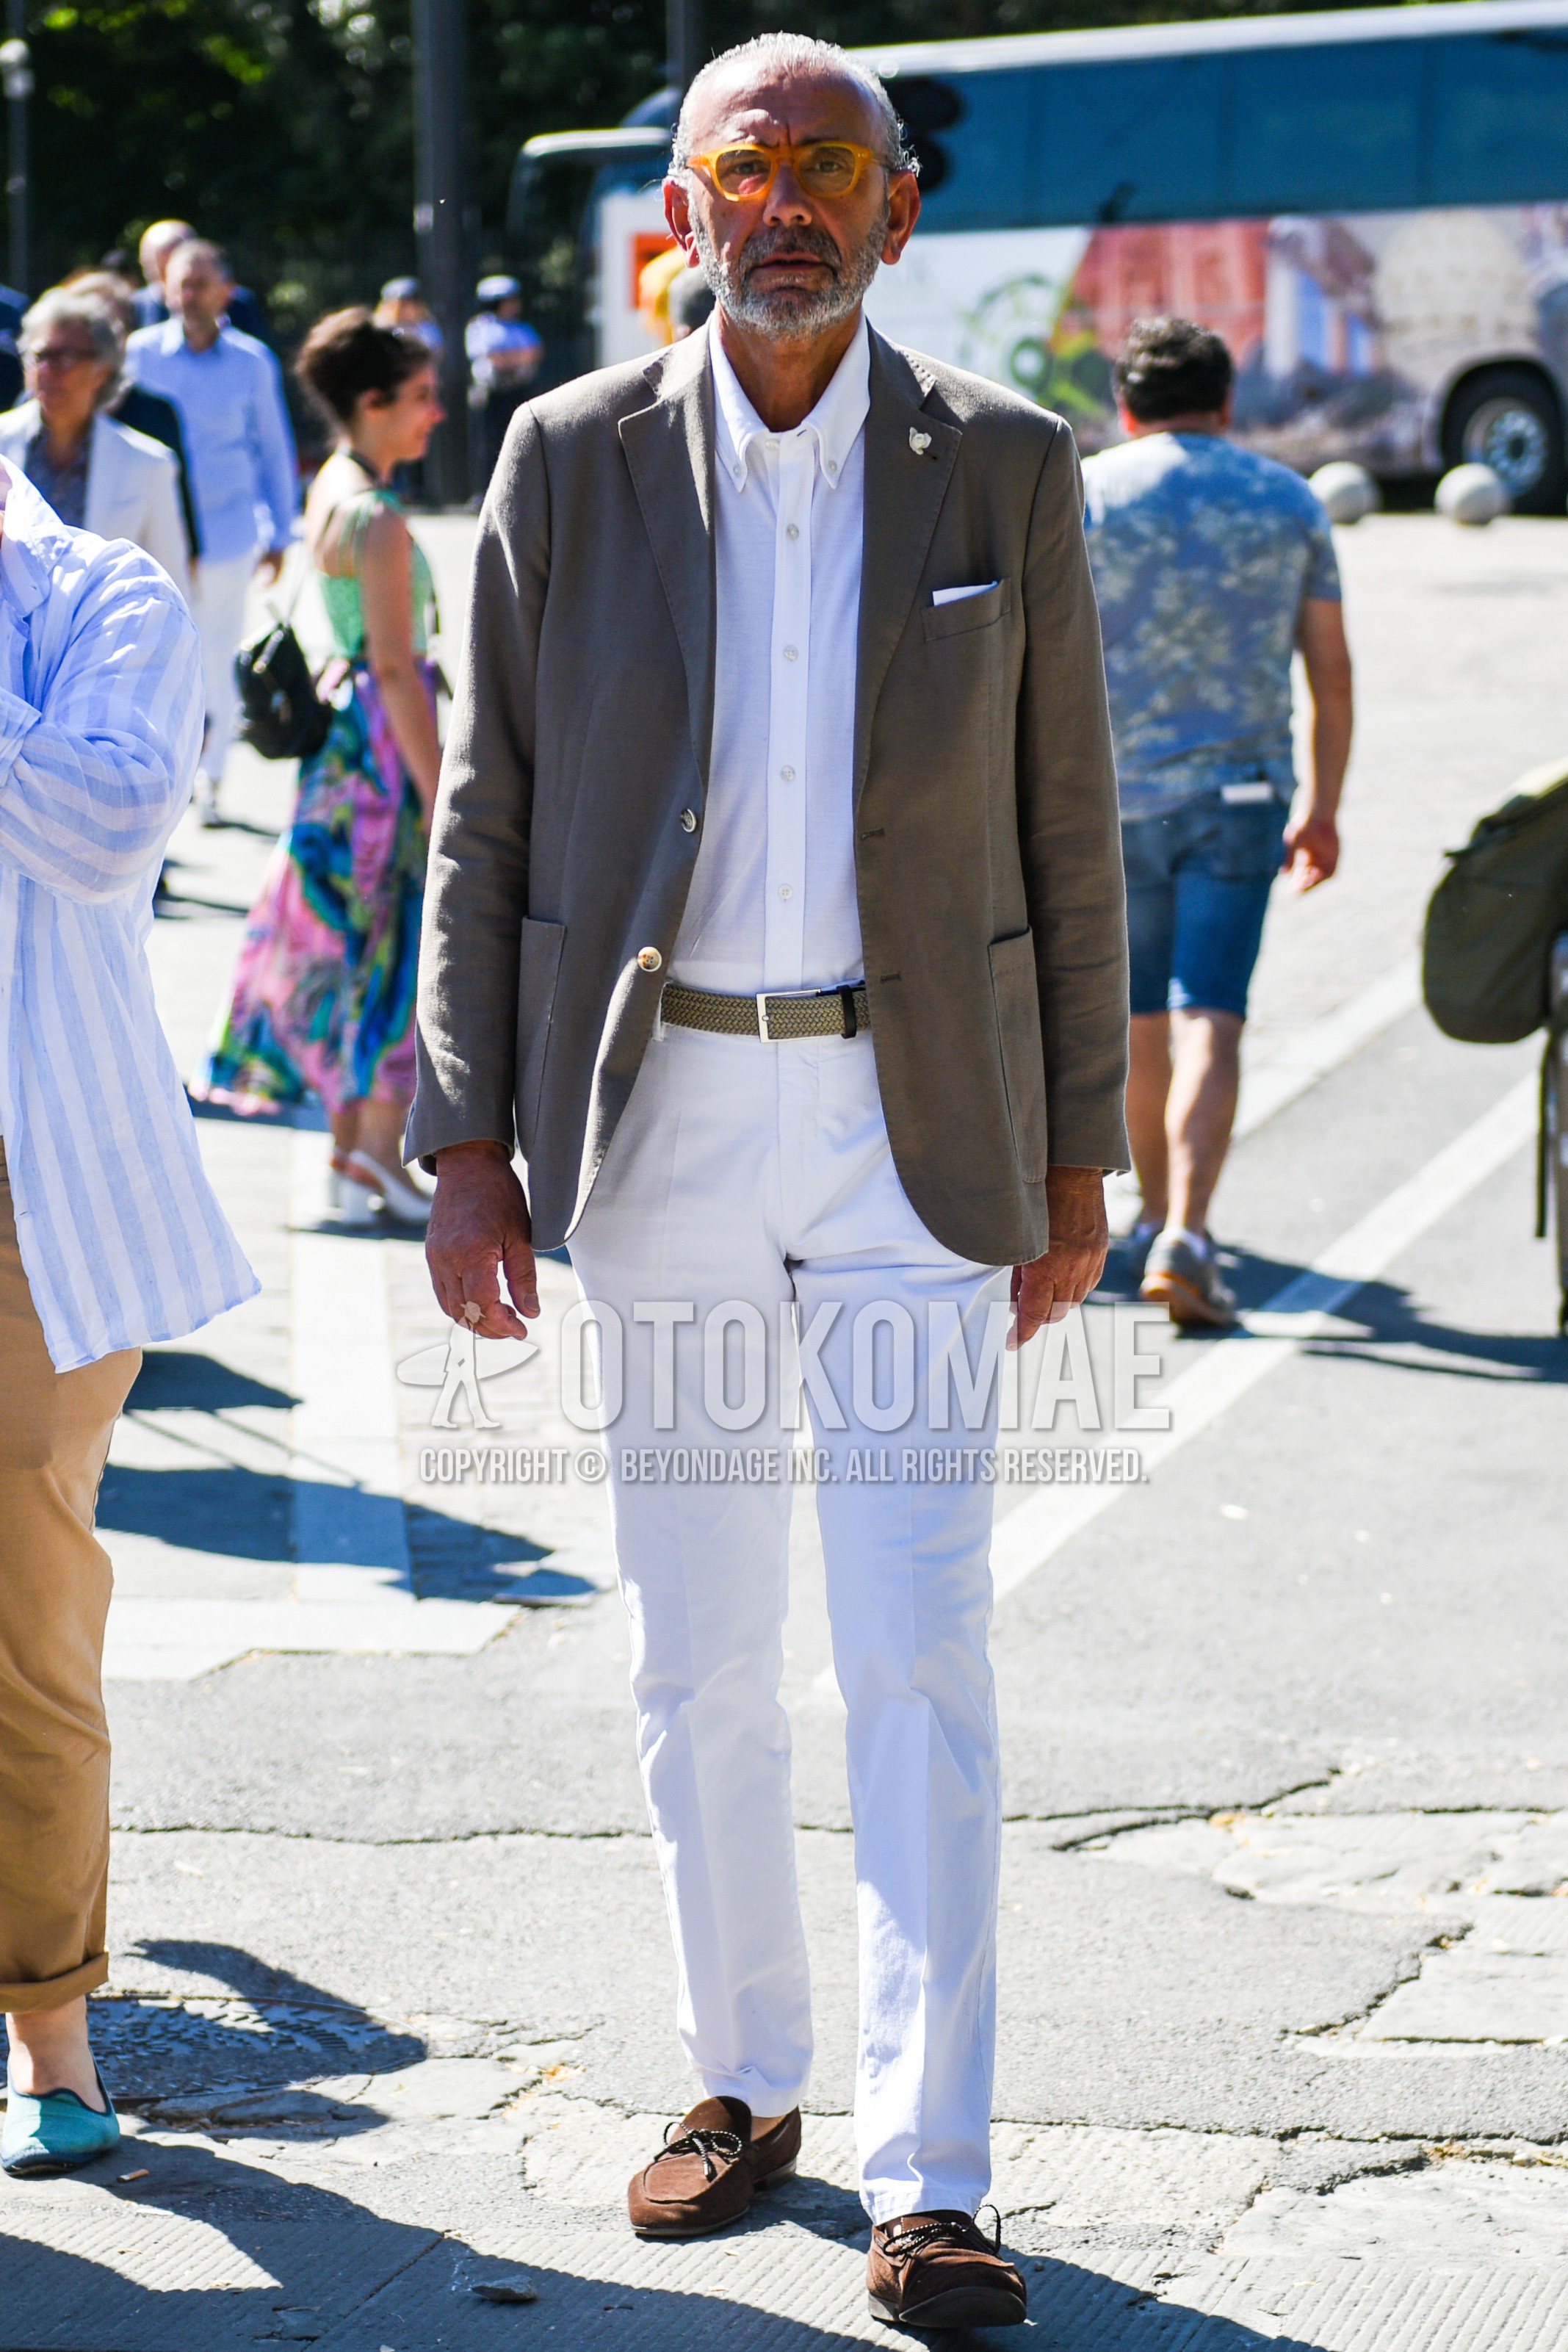 Men's spring summer autumn outfit with yellow plain glasses, gray plain tailored jacket, white plain shirt, beige plain braided belt, white plain cotton pants, brown moccasins/deck shoes leather shoes.